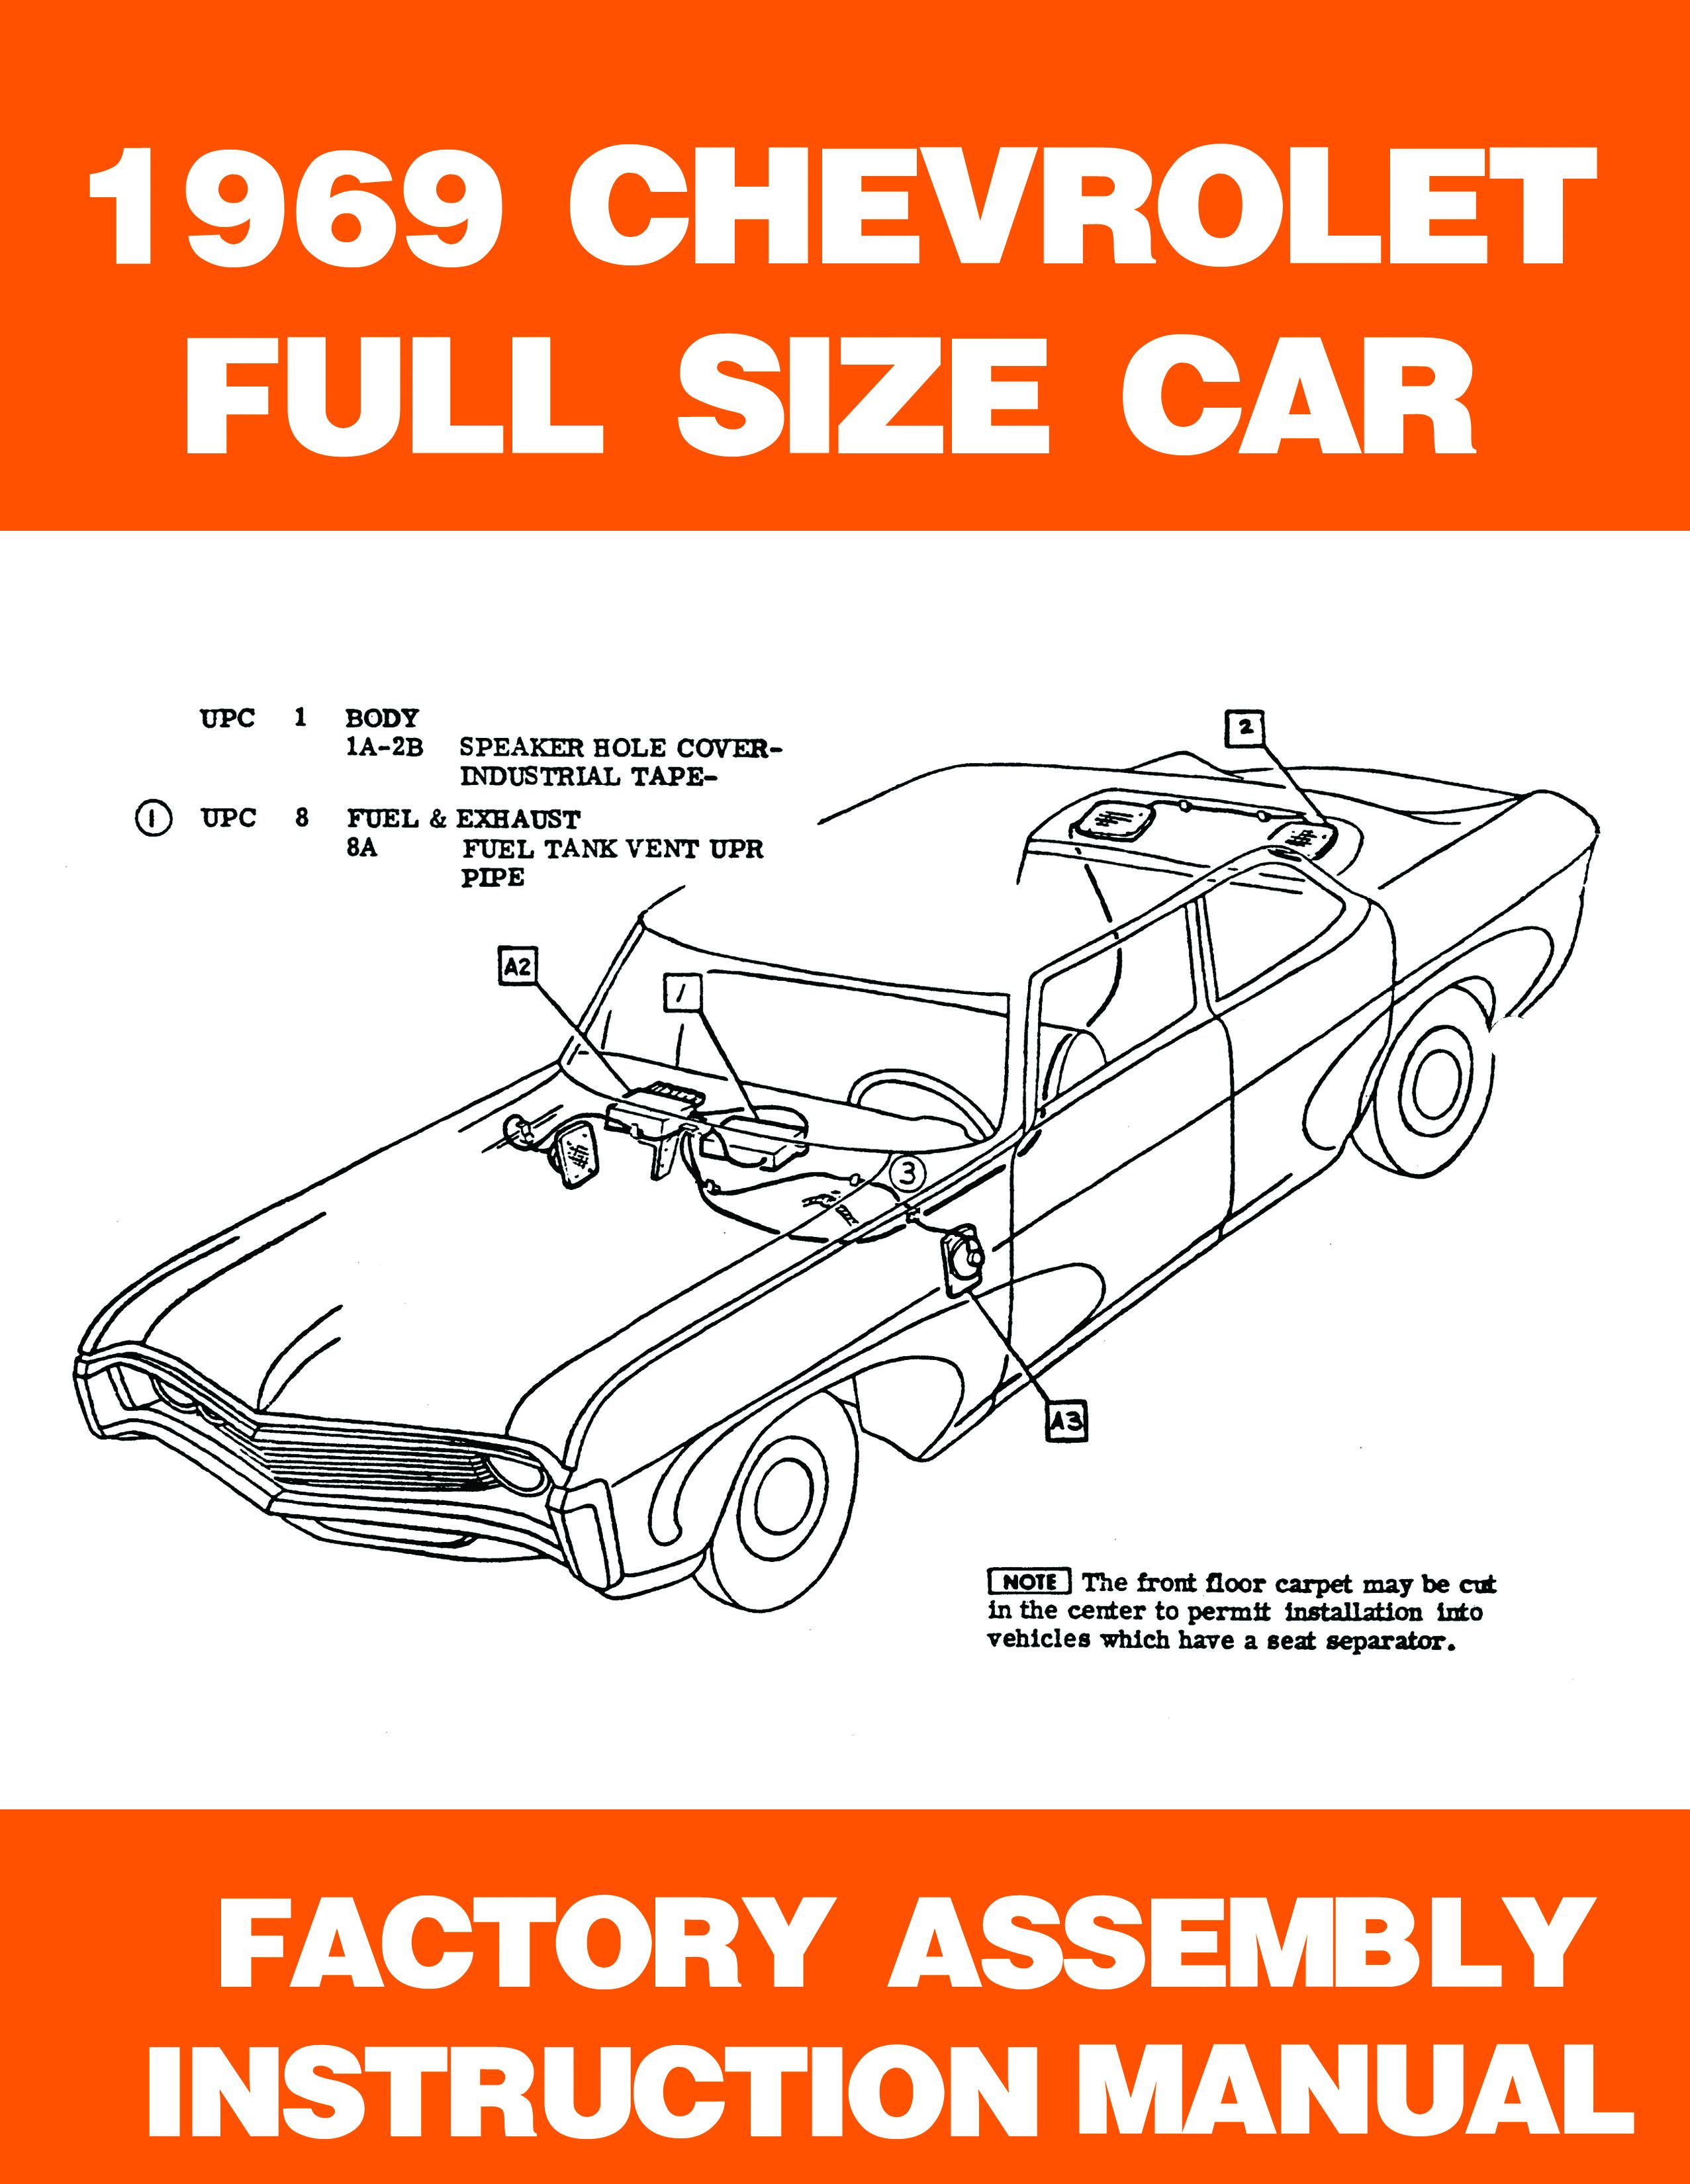 american-autowire, Factory Assembly Manual - 1969 Chevy Fullsize